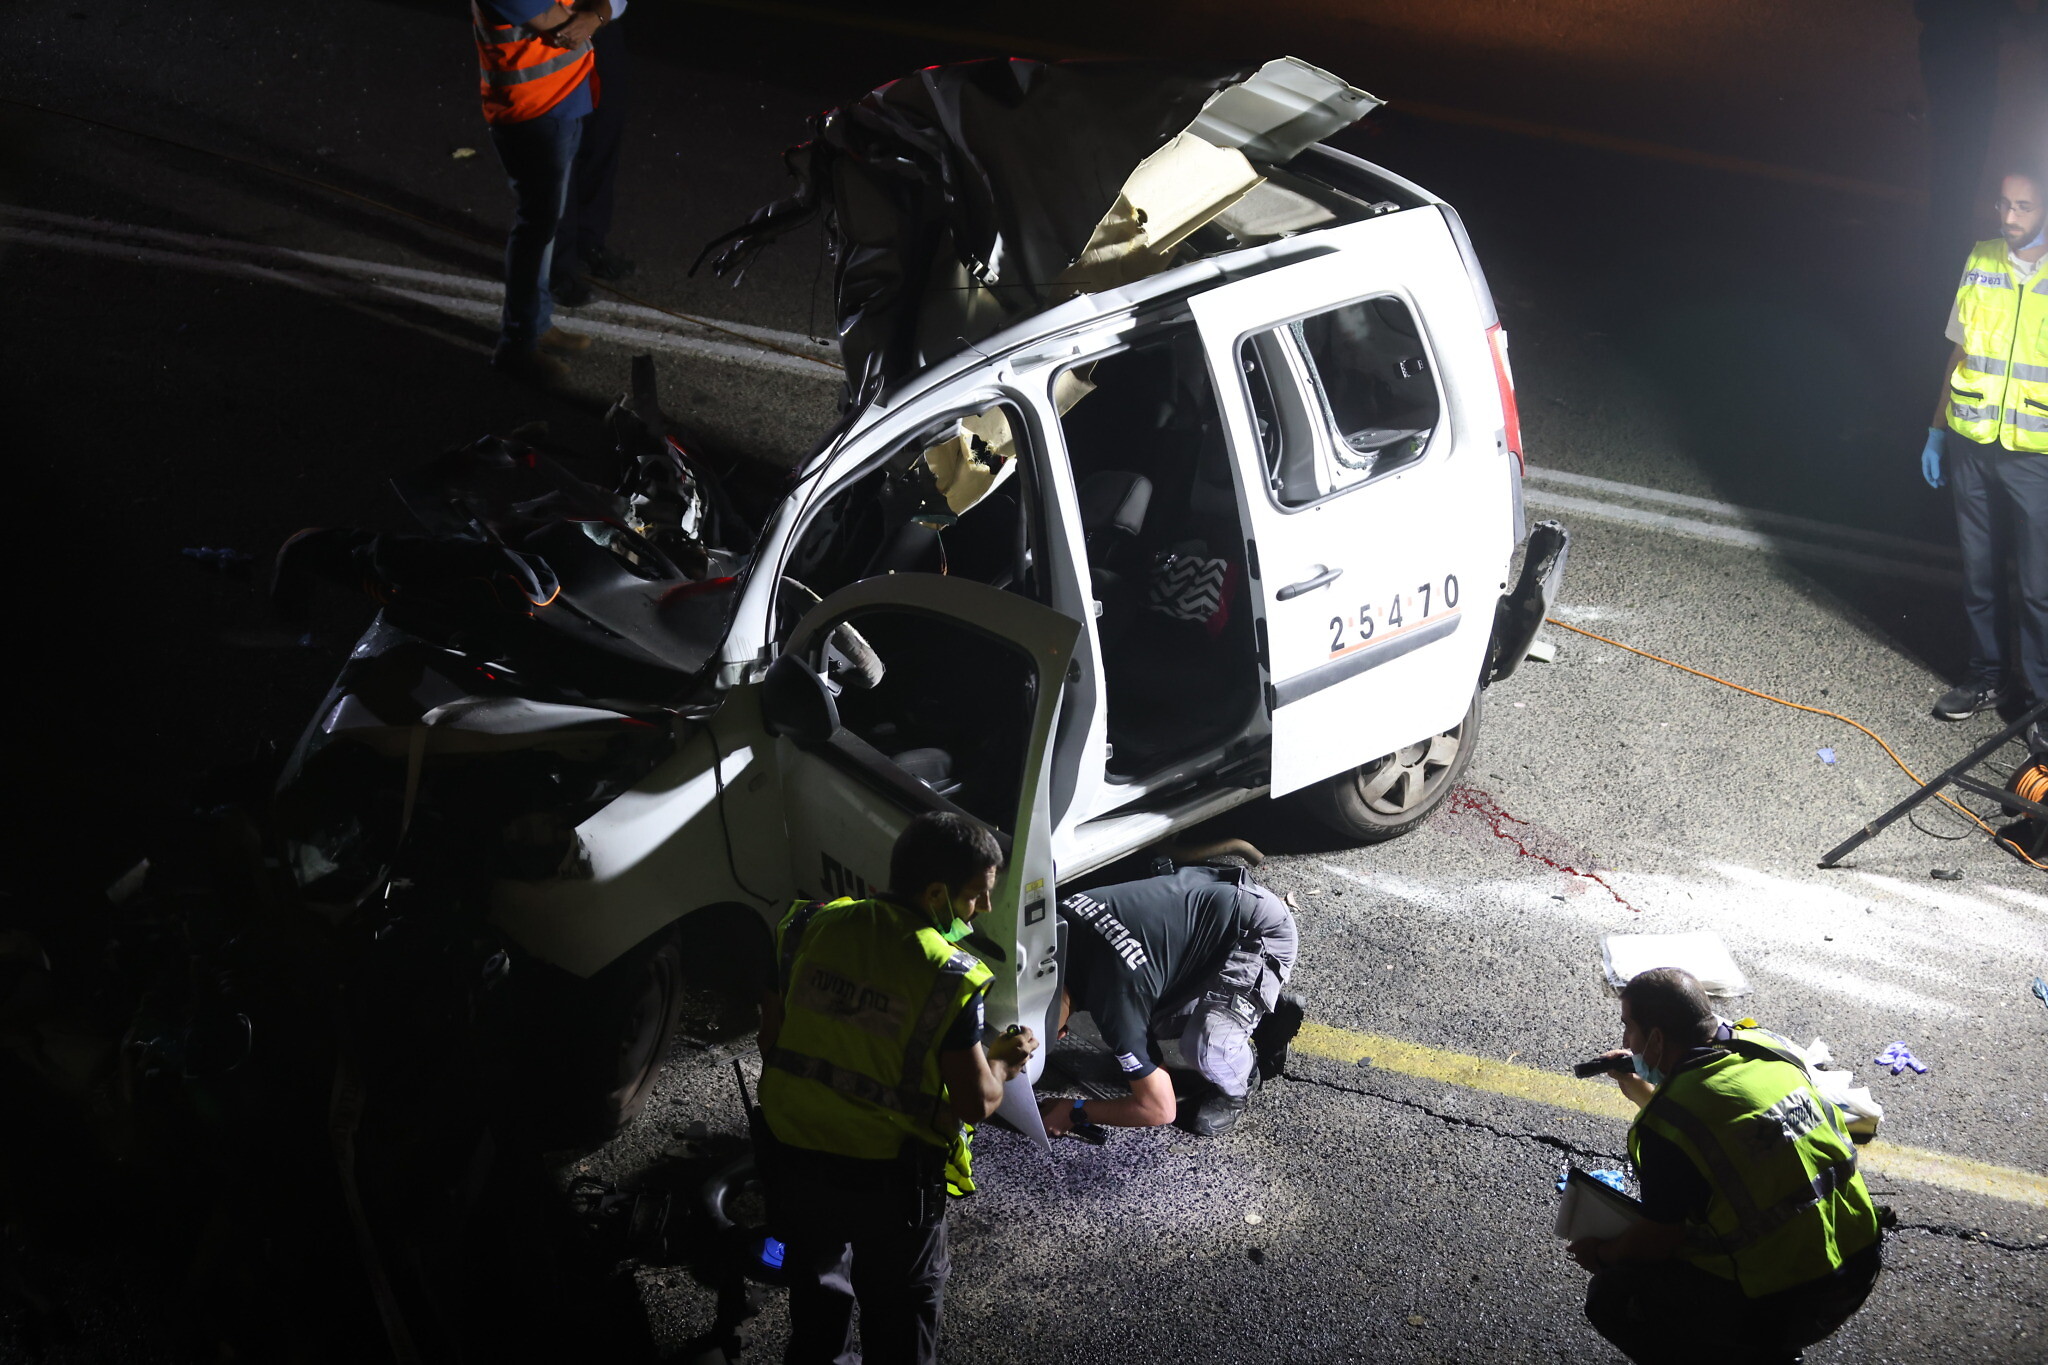 Traffic Accidents Soar In 2021 With Almost 300 Killed The Times Of Israel